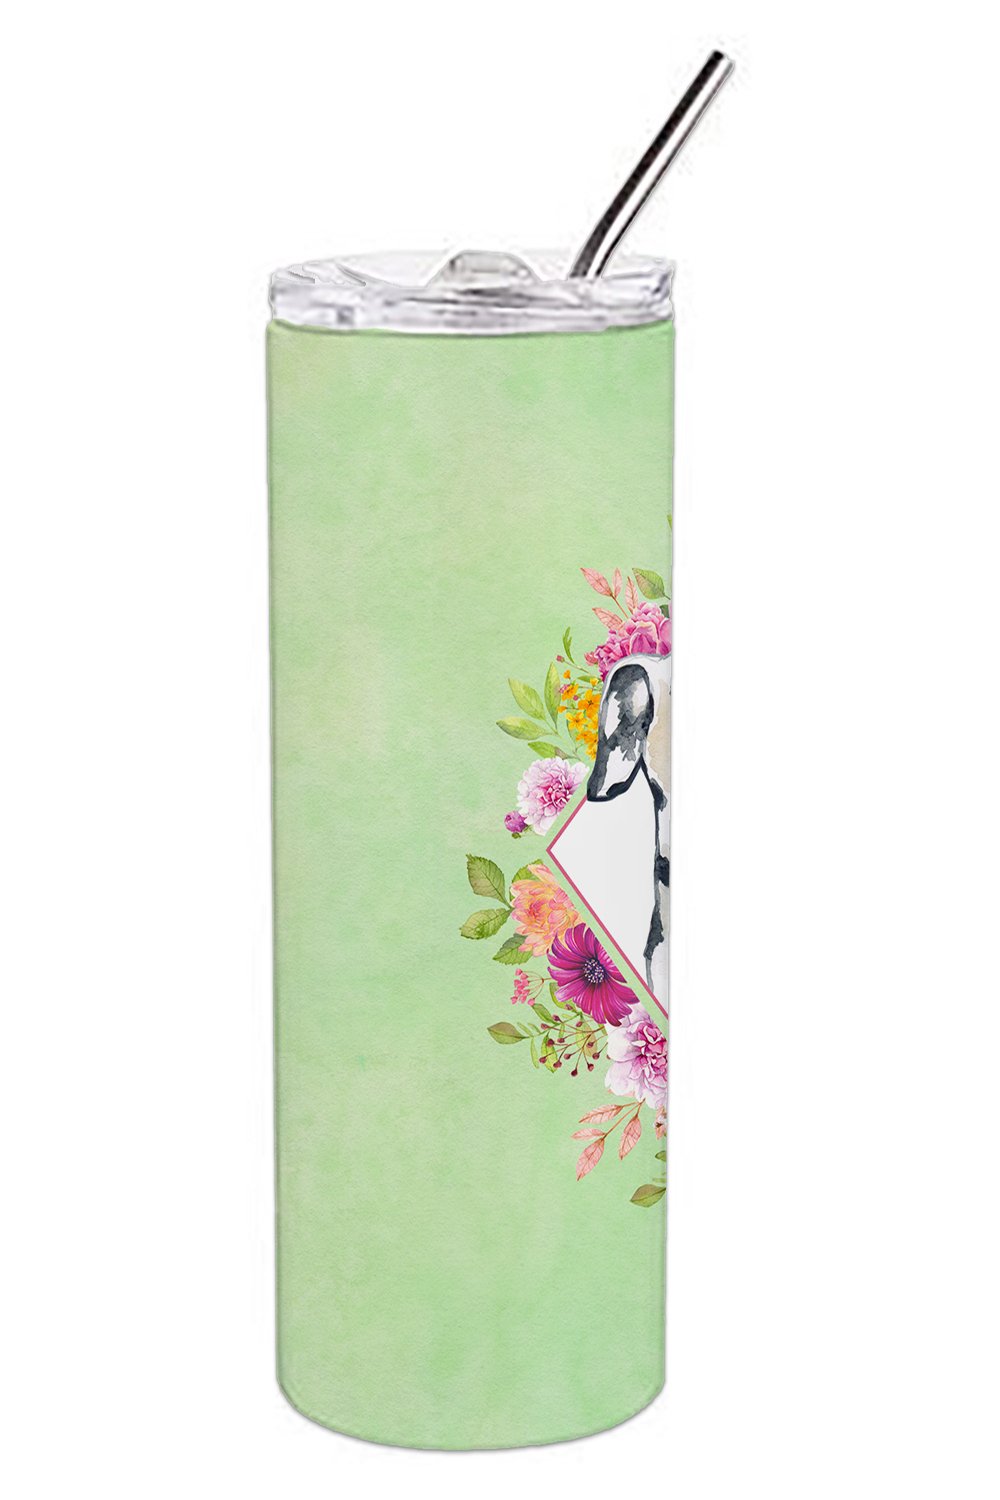 Dalmatian Green Flowers Double Walled Stainless Steel 20 oz Skinny Tumbler CK4297TBL20 by Caroline's Treasures